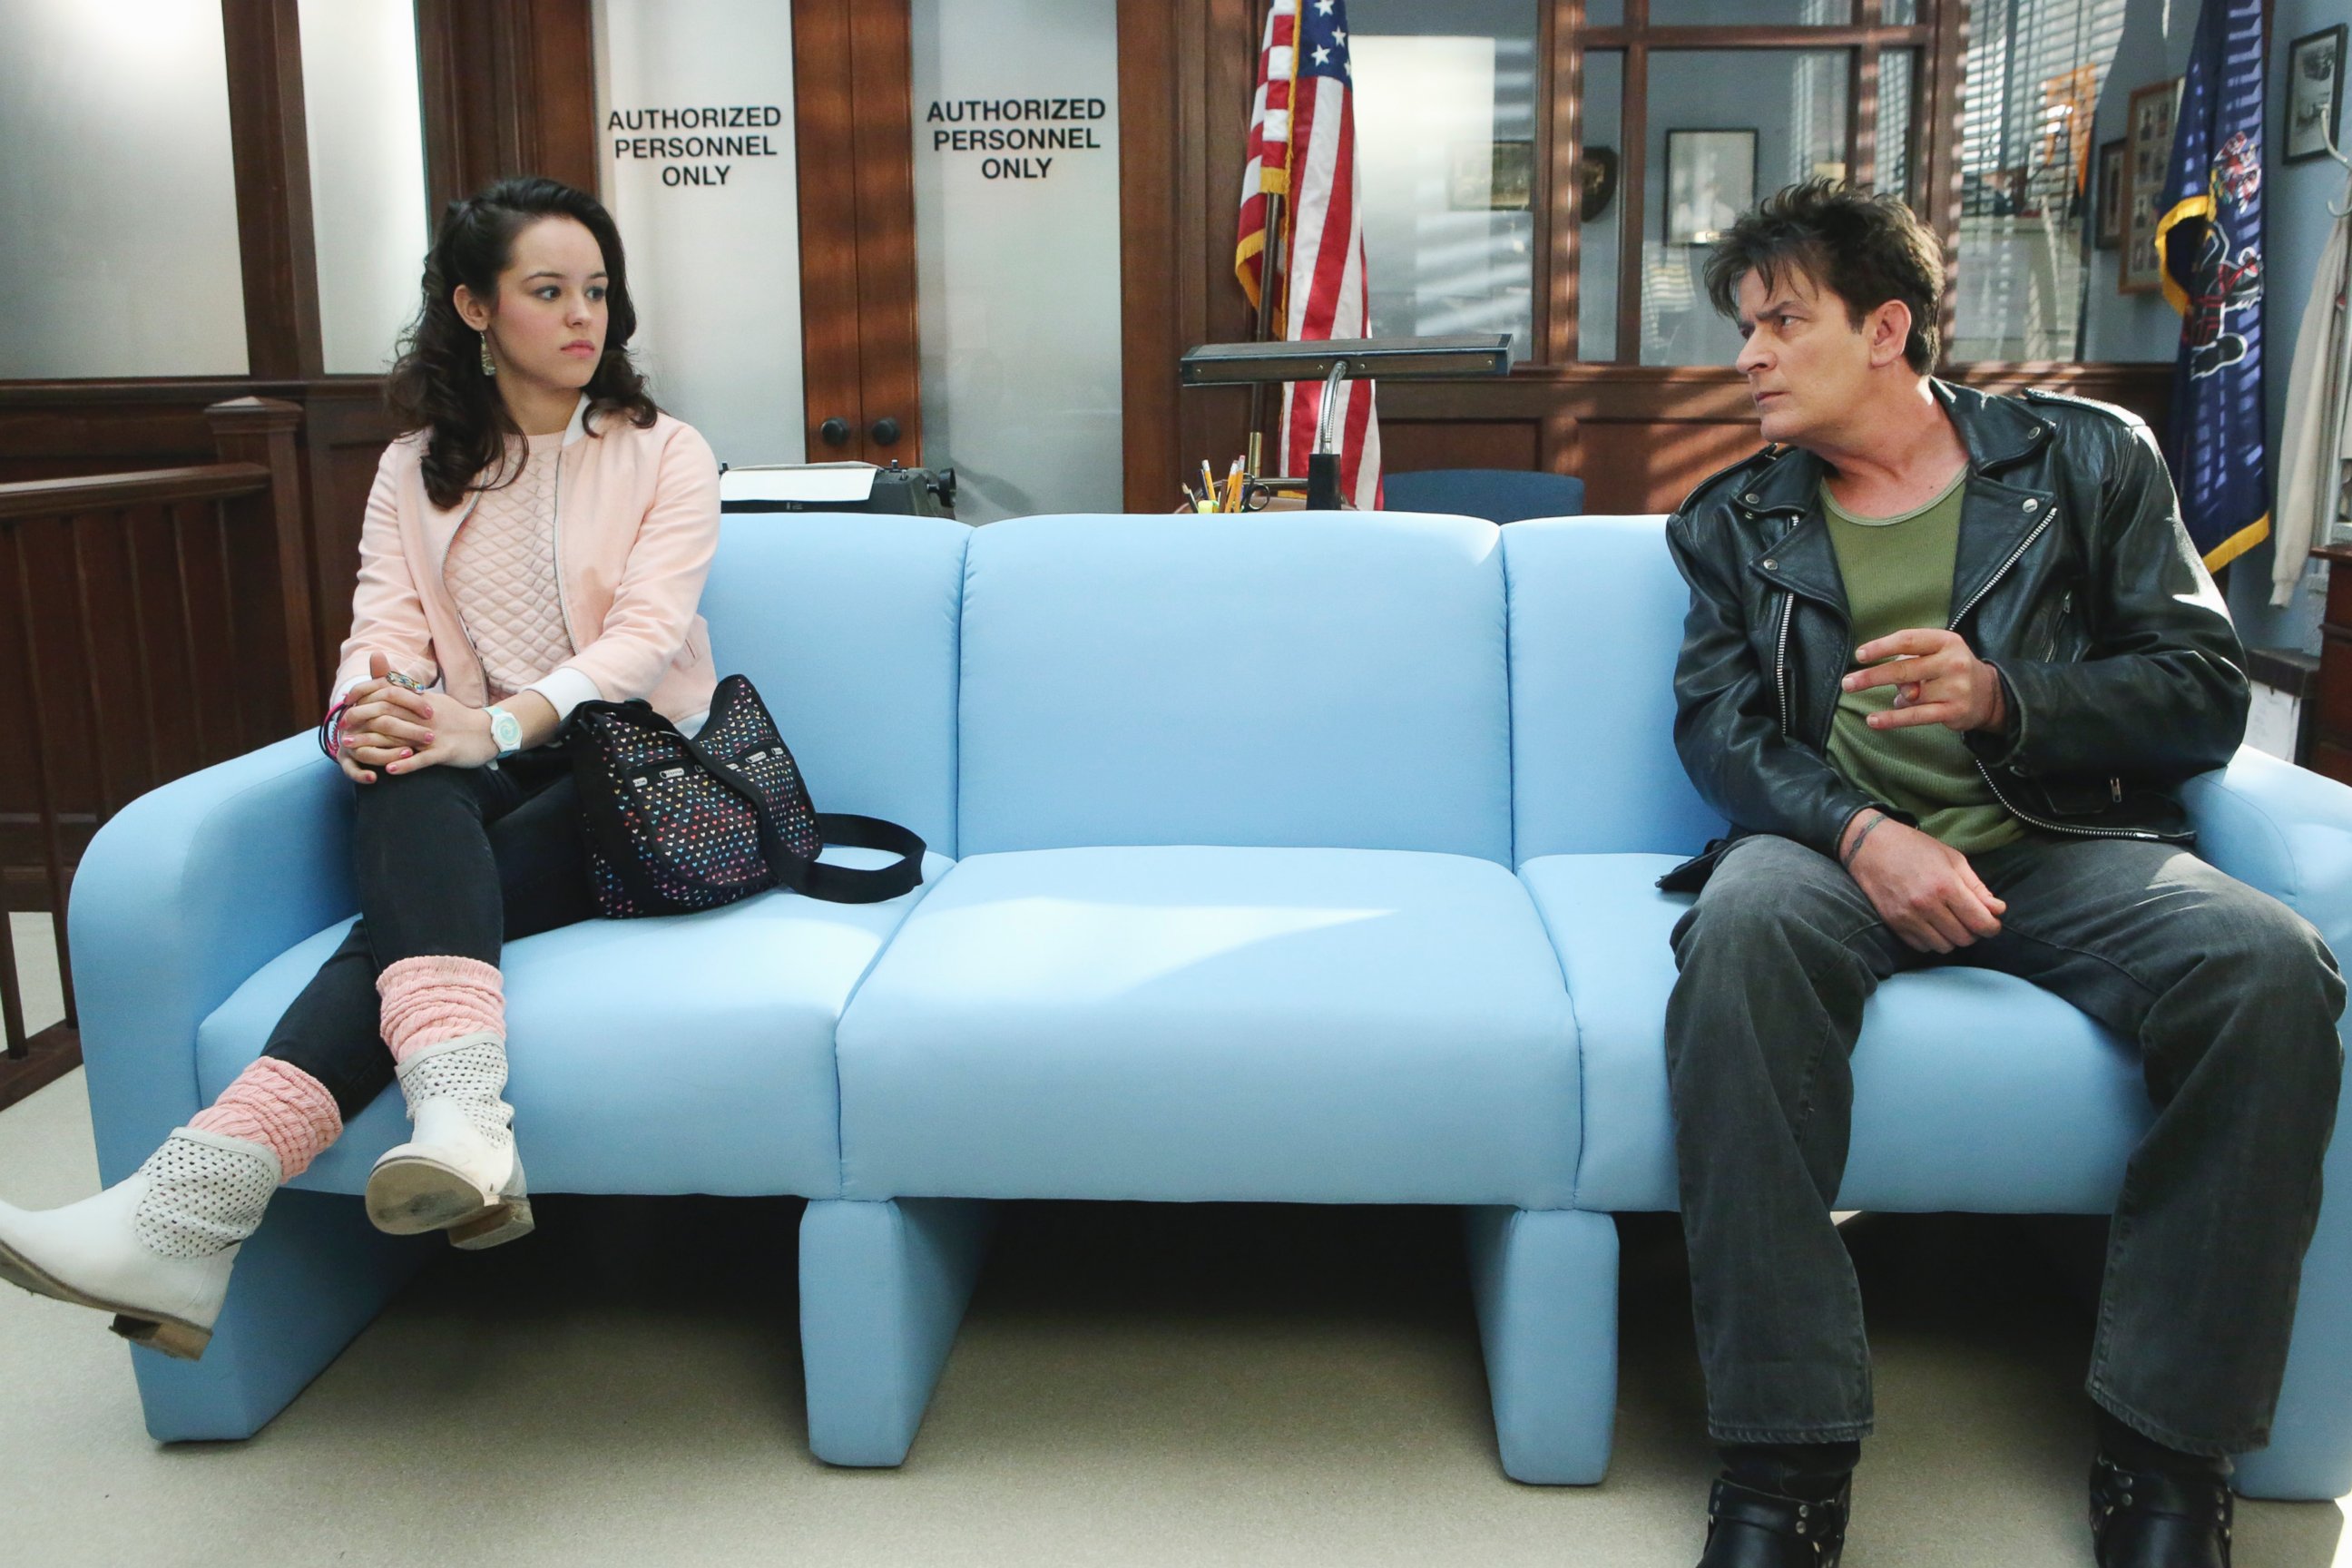 PHOTO: Charlie Sheen and Hayley Orrantia in "The Goldbergs."